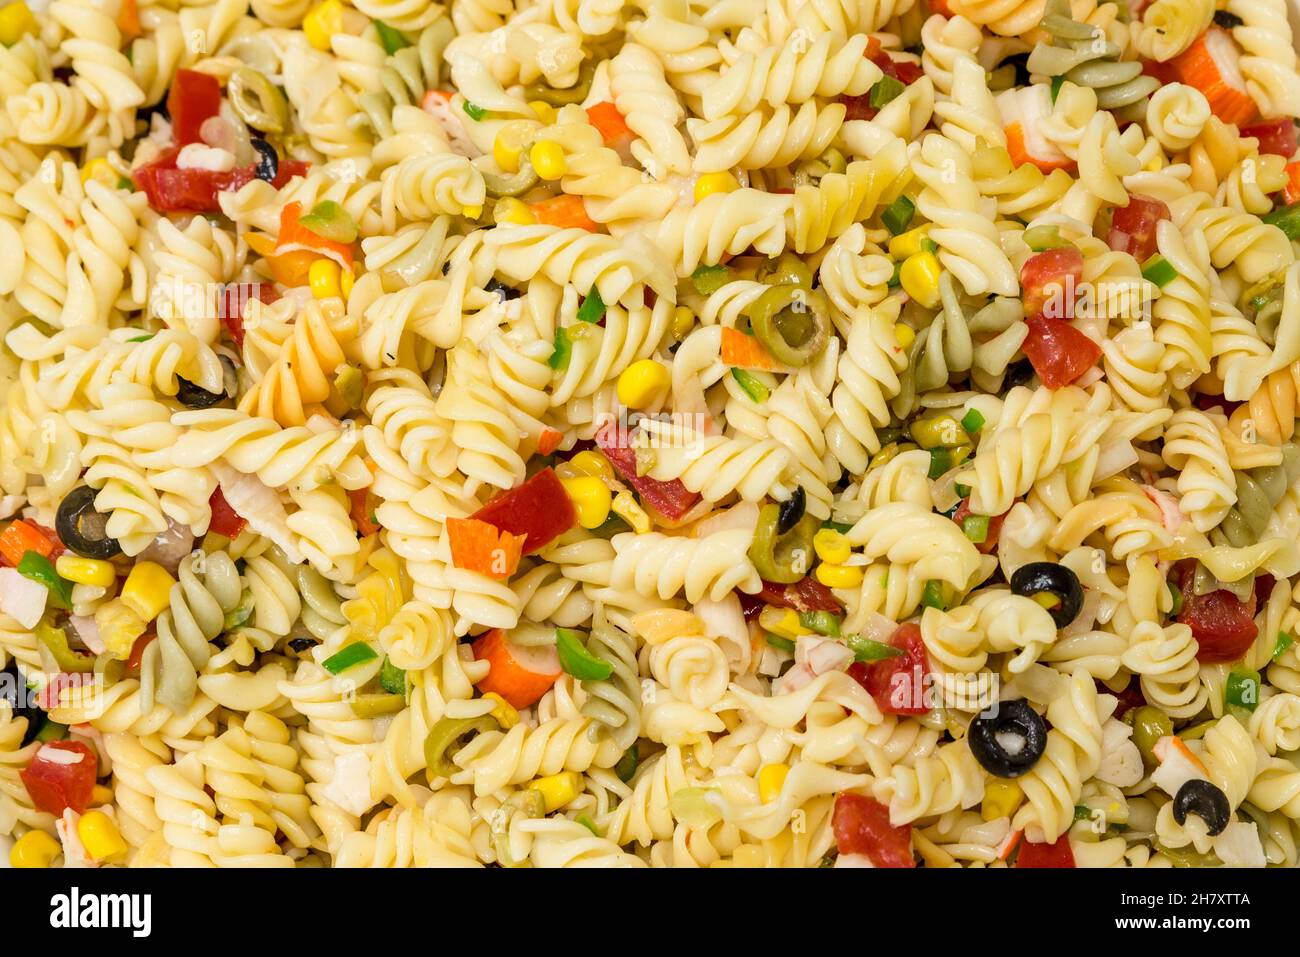 Pasta salad background with black olives, corn, peppers and surimi Stock Photo